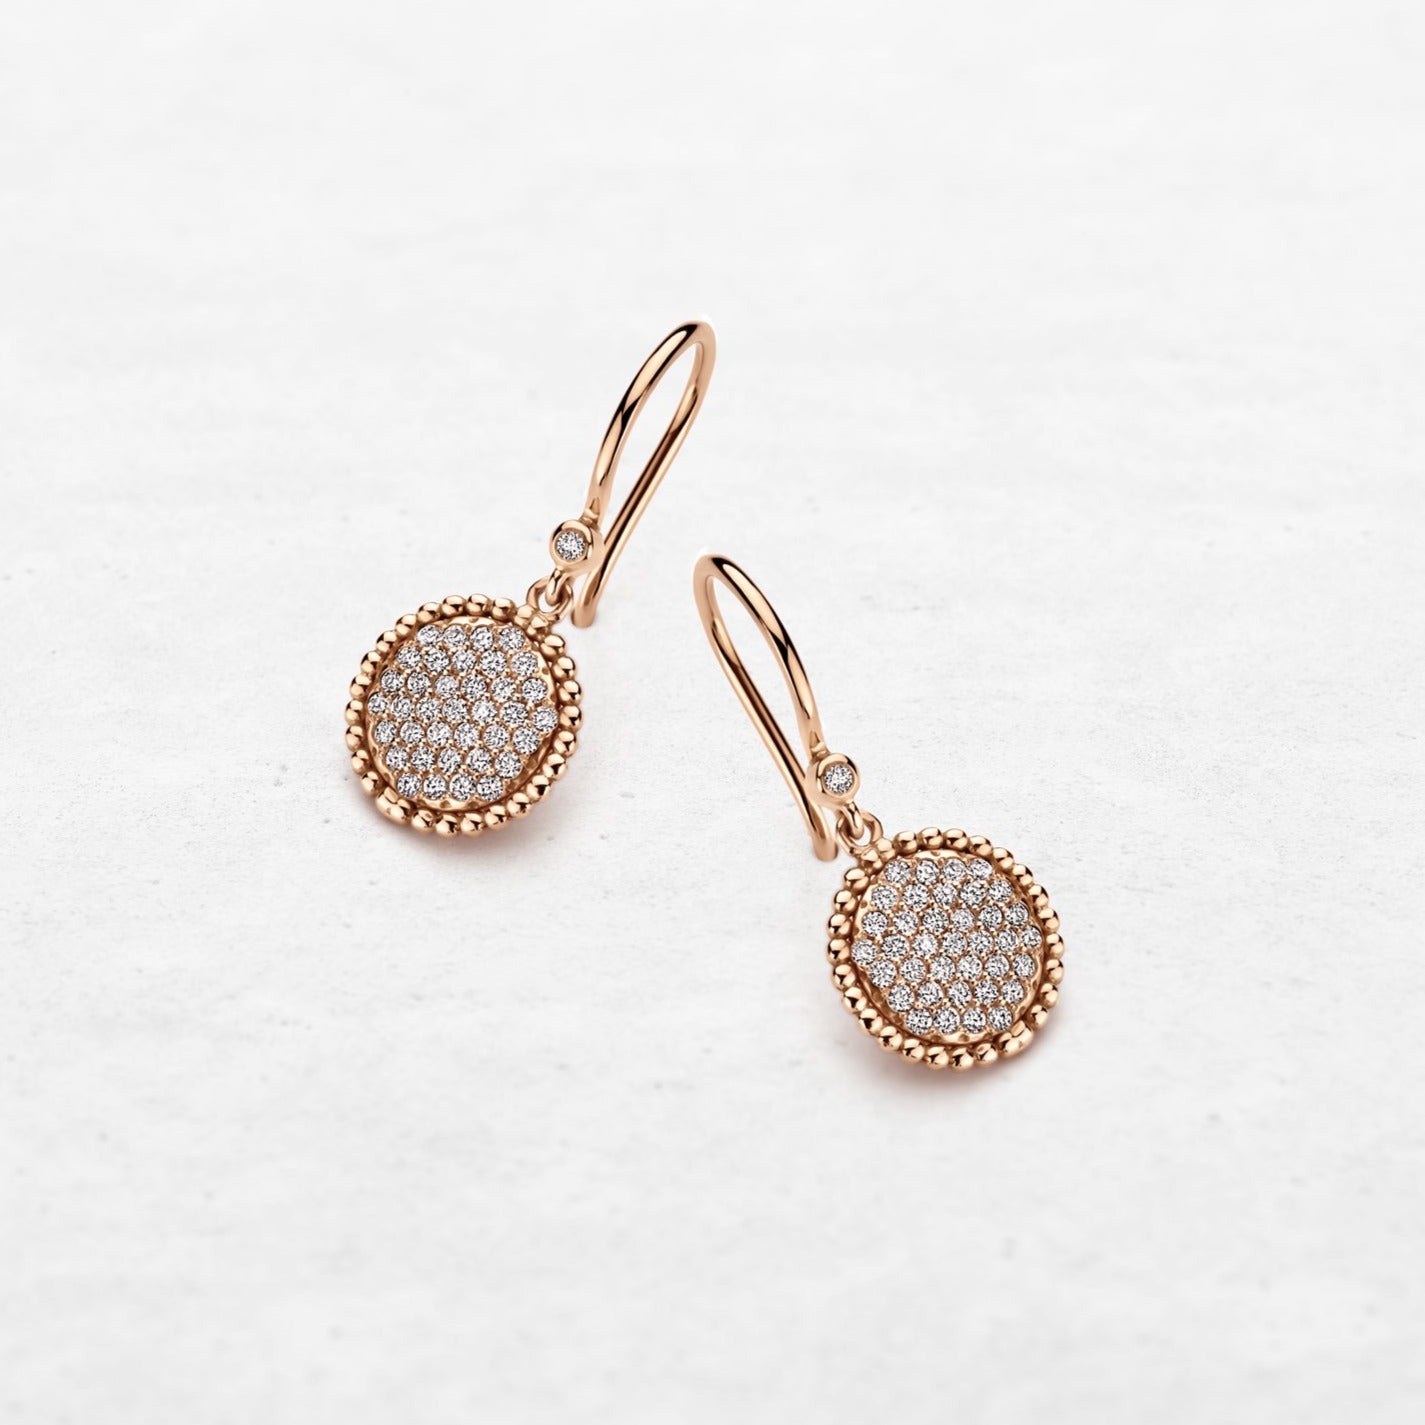 Earrings with circular plateau set in diamonds in rose gold made by O! Jewelry